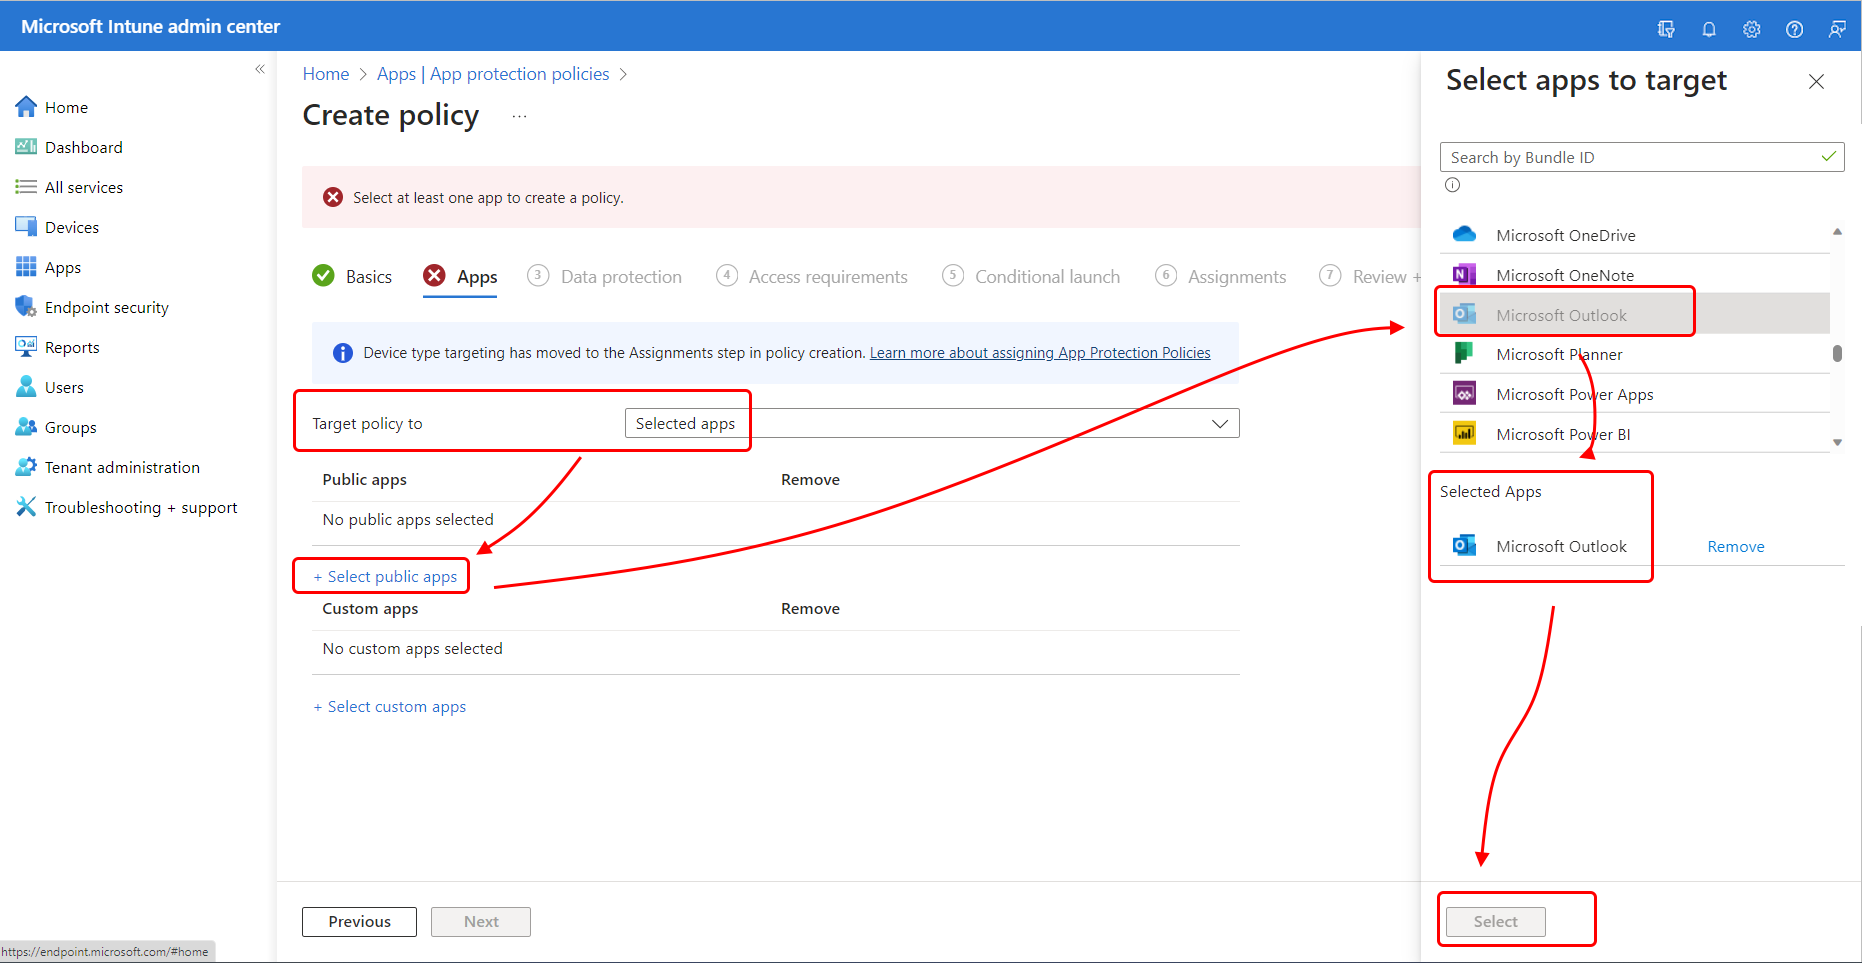 Locate and add Microsoft Outlook as a public app for this policy.